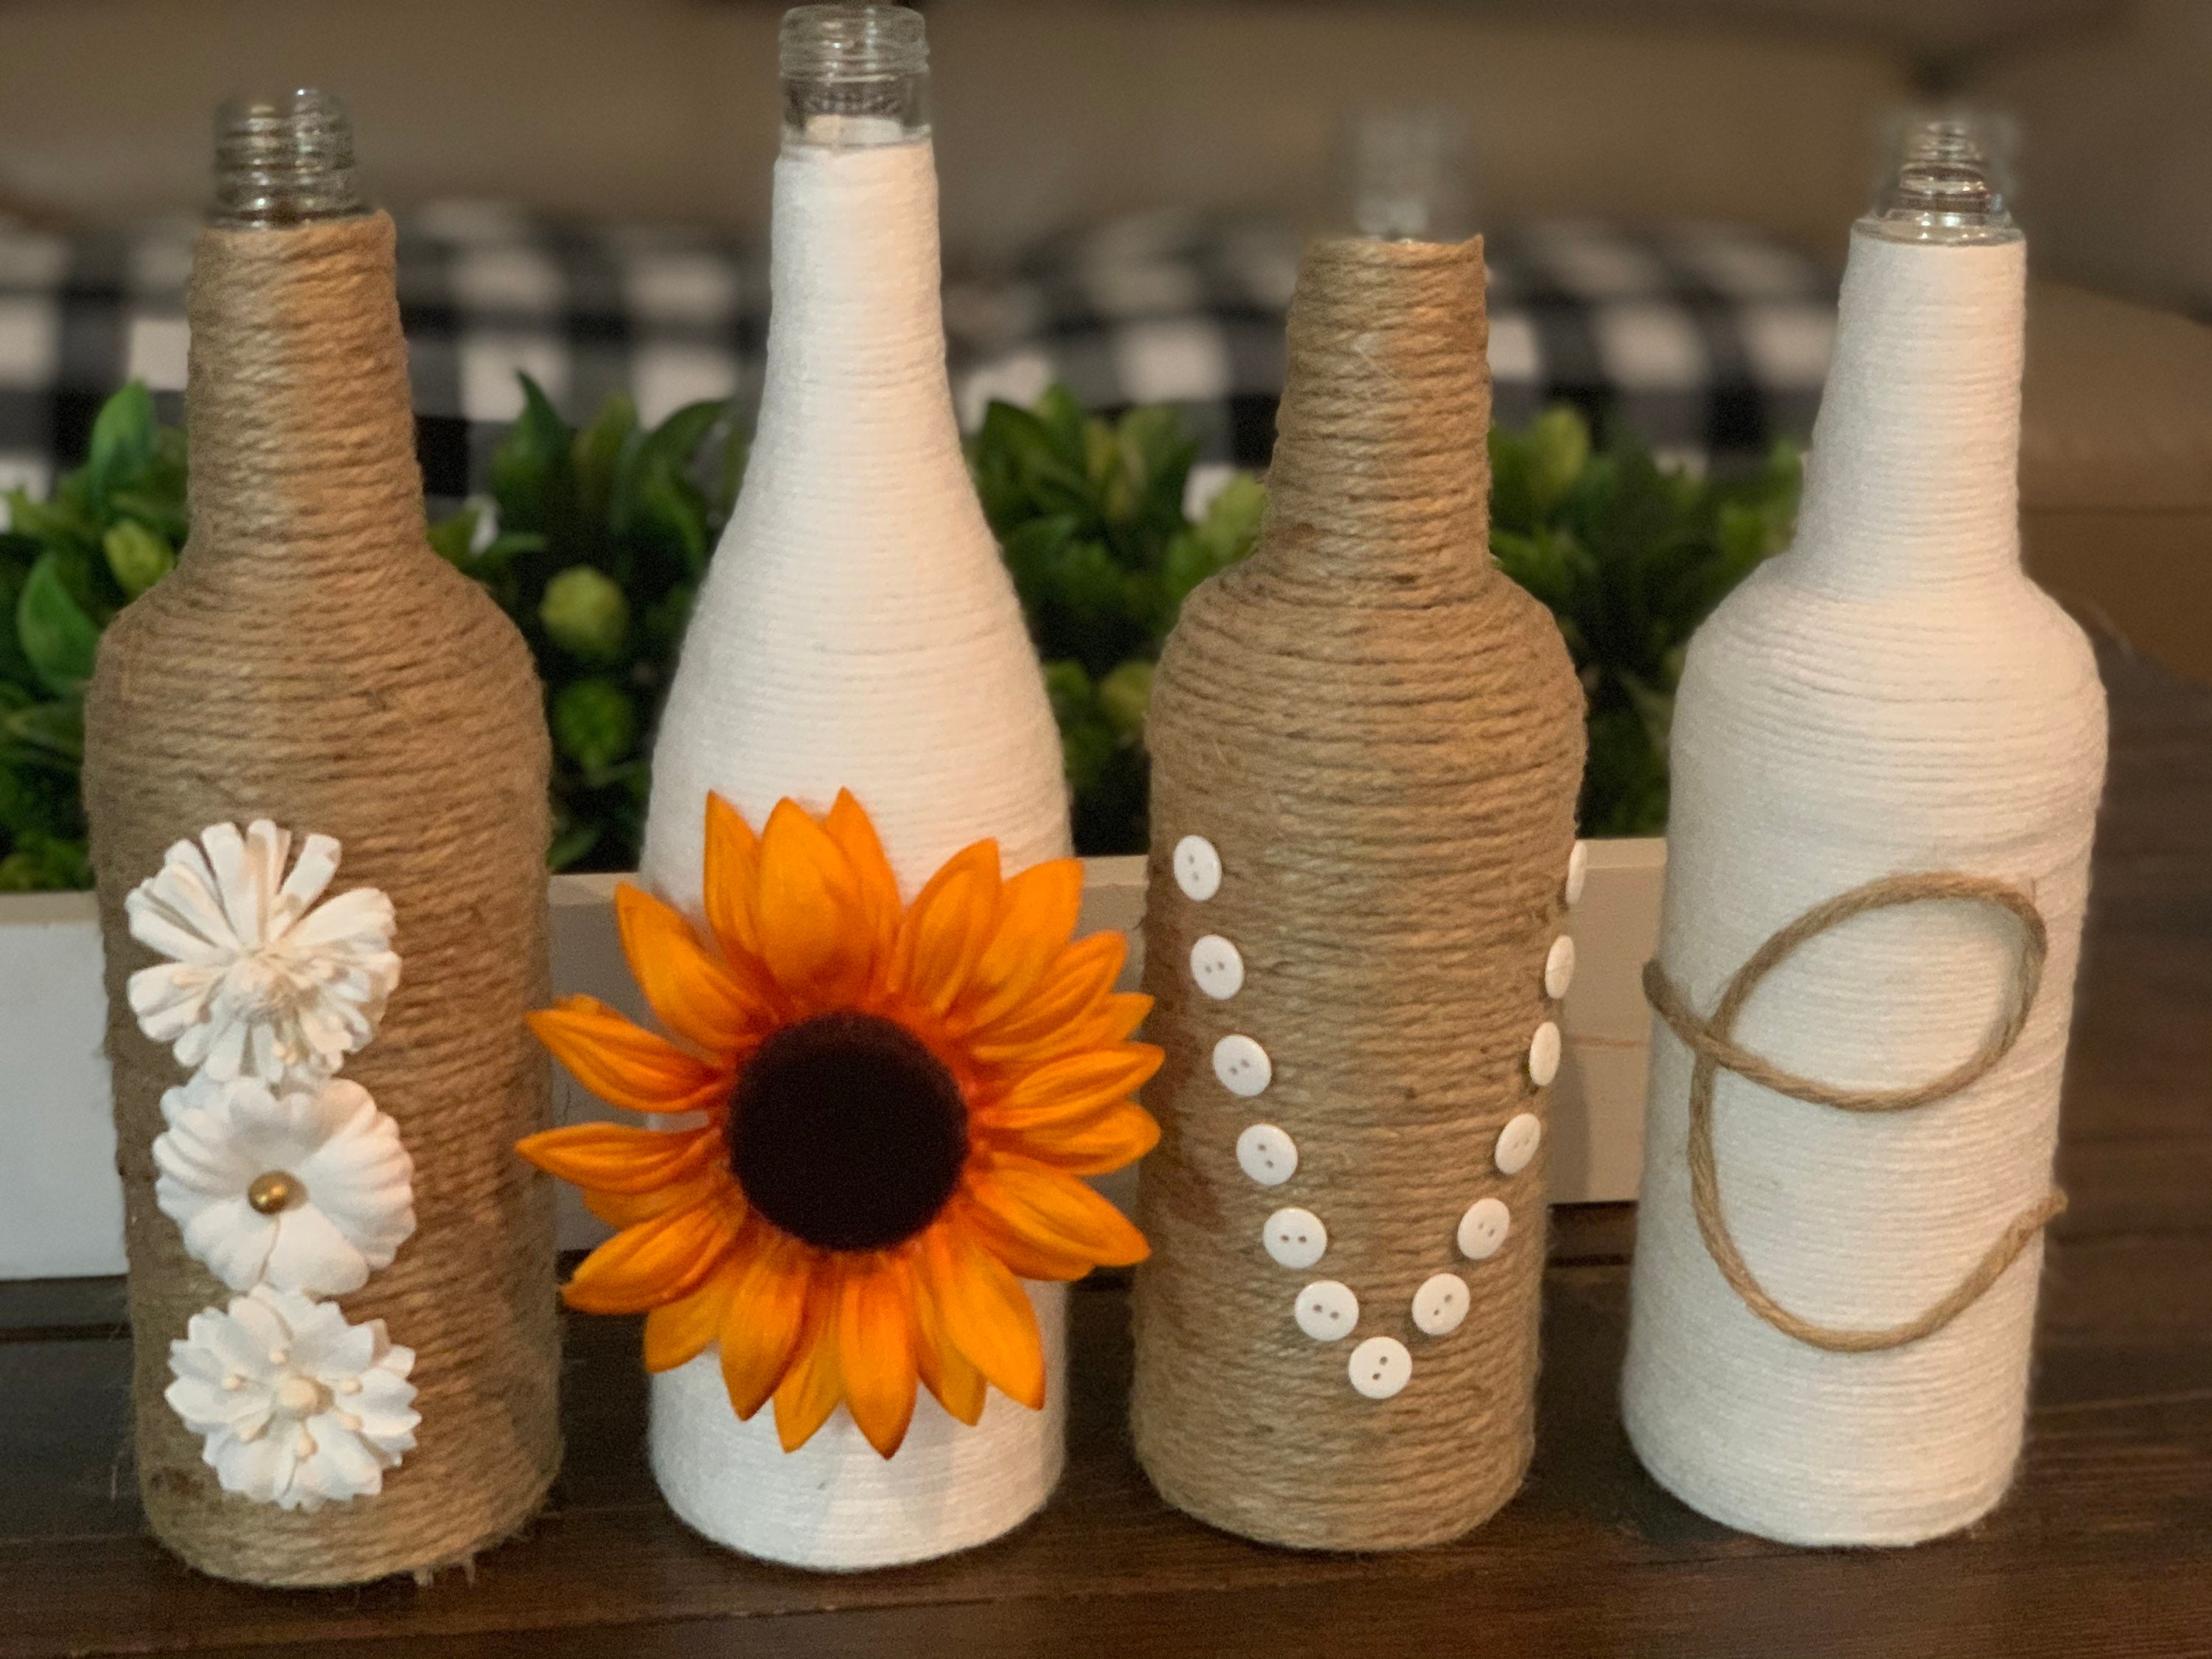 DIY wine bottle vases with colored twine - Cucicucicoo